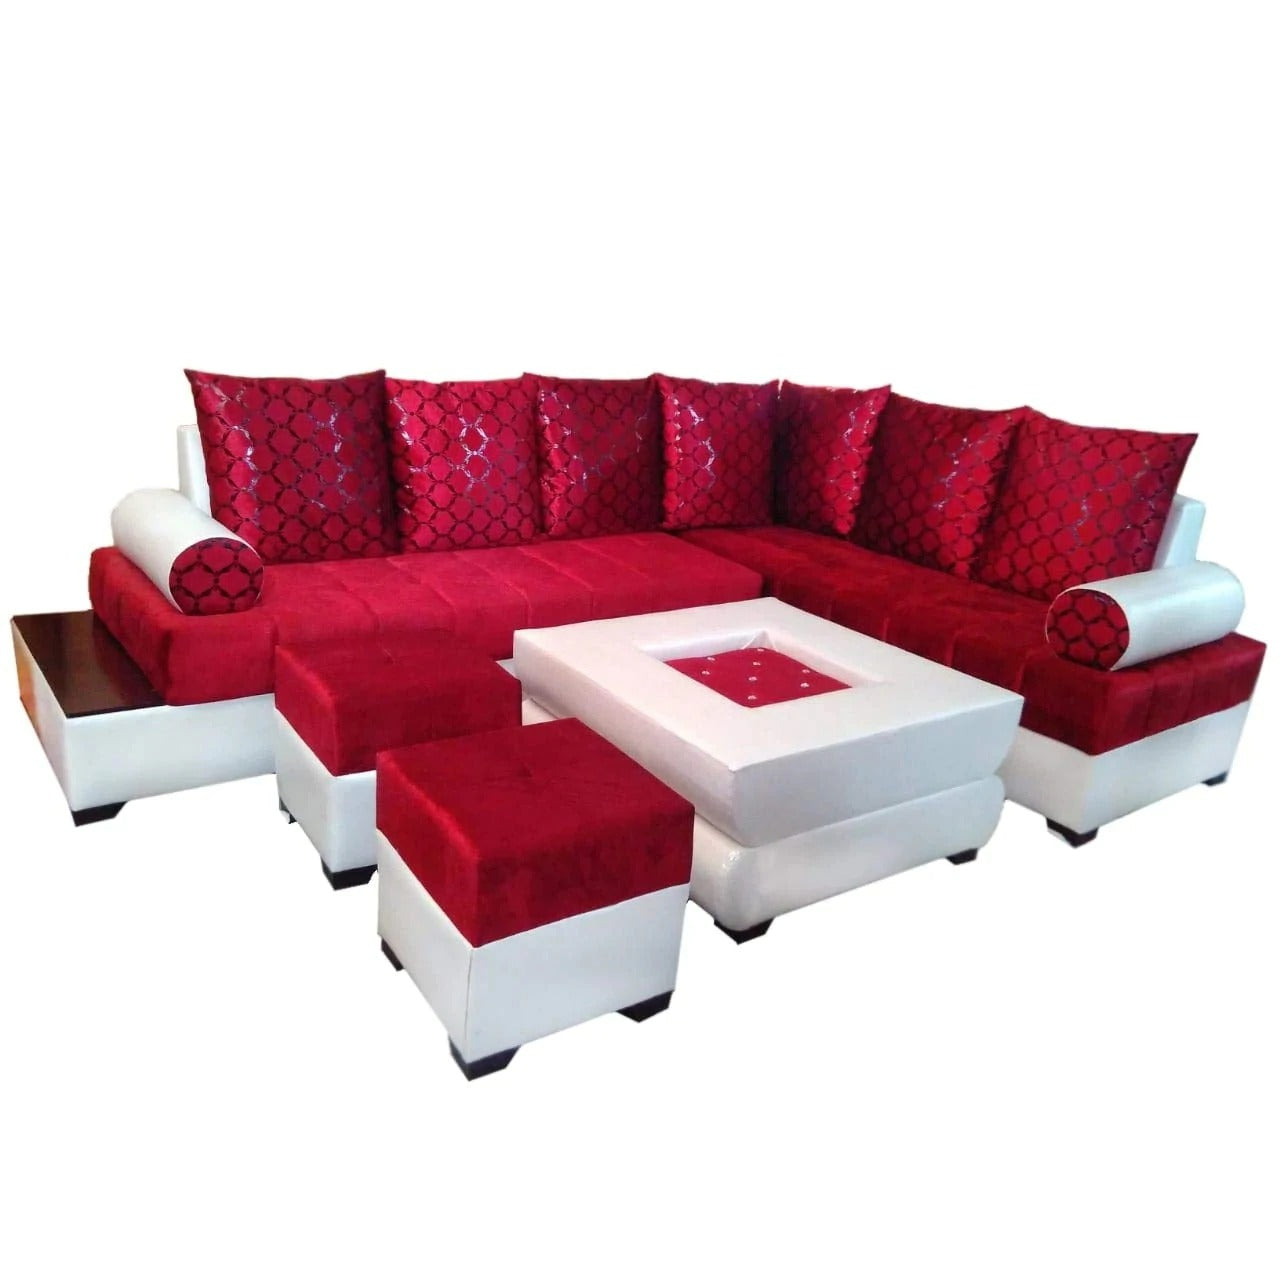 https://shop.gkwretail.com/collections/7-seater-sofa-set/products/l-shape-sofa-set-half-leather-sofa-set-with-center-table-and-2-puffy-red-and-white